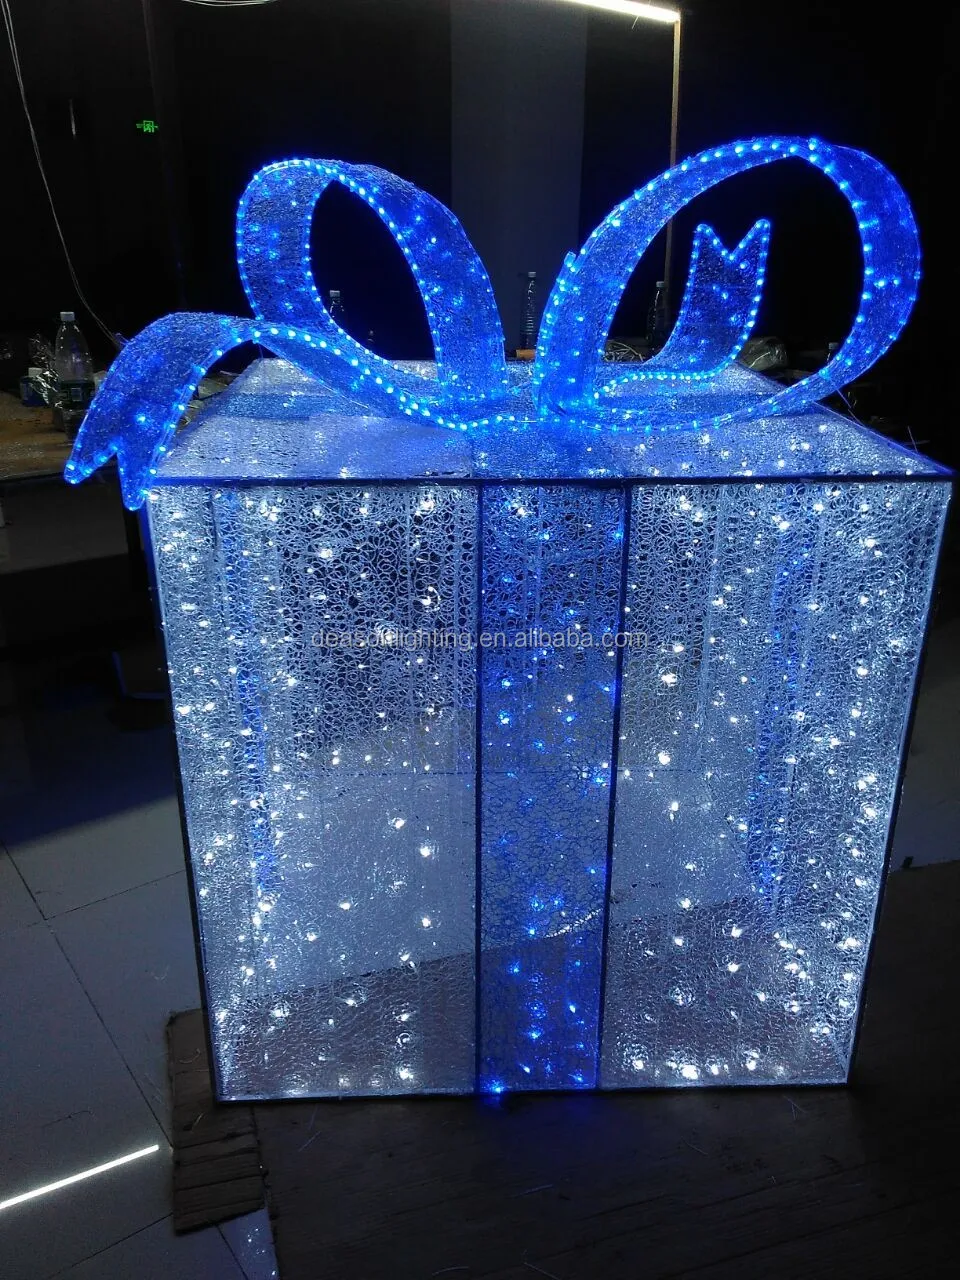 Outdoor Led Christmas Gift Boxes - Buy Led Christmas Gift Boxes,Gift